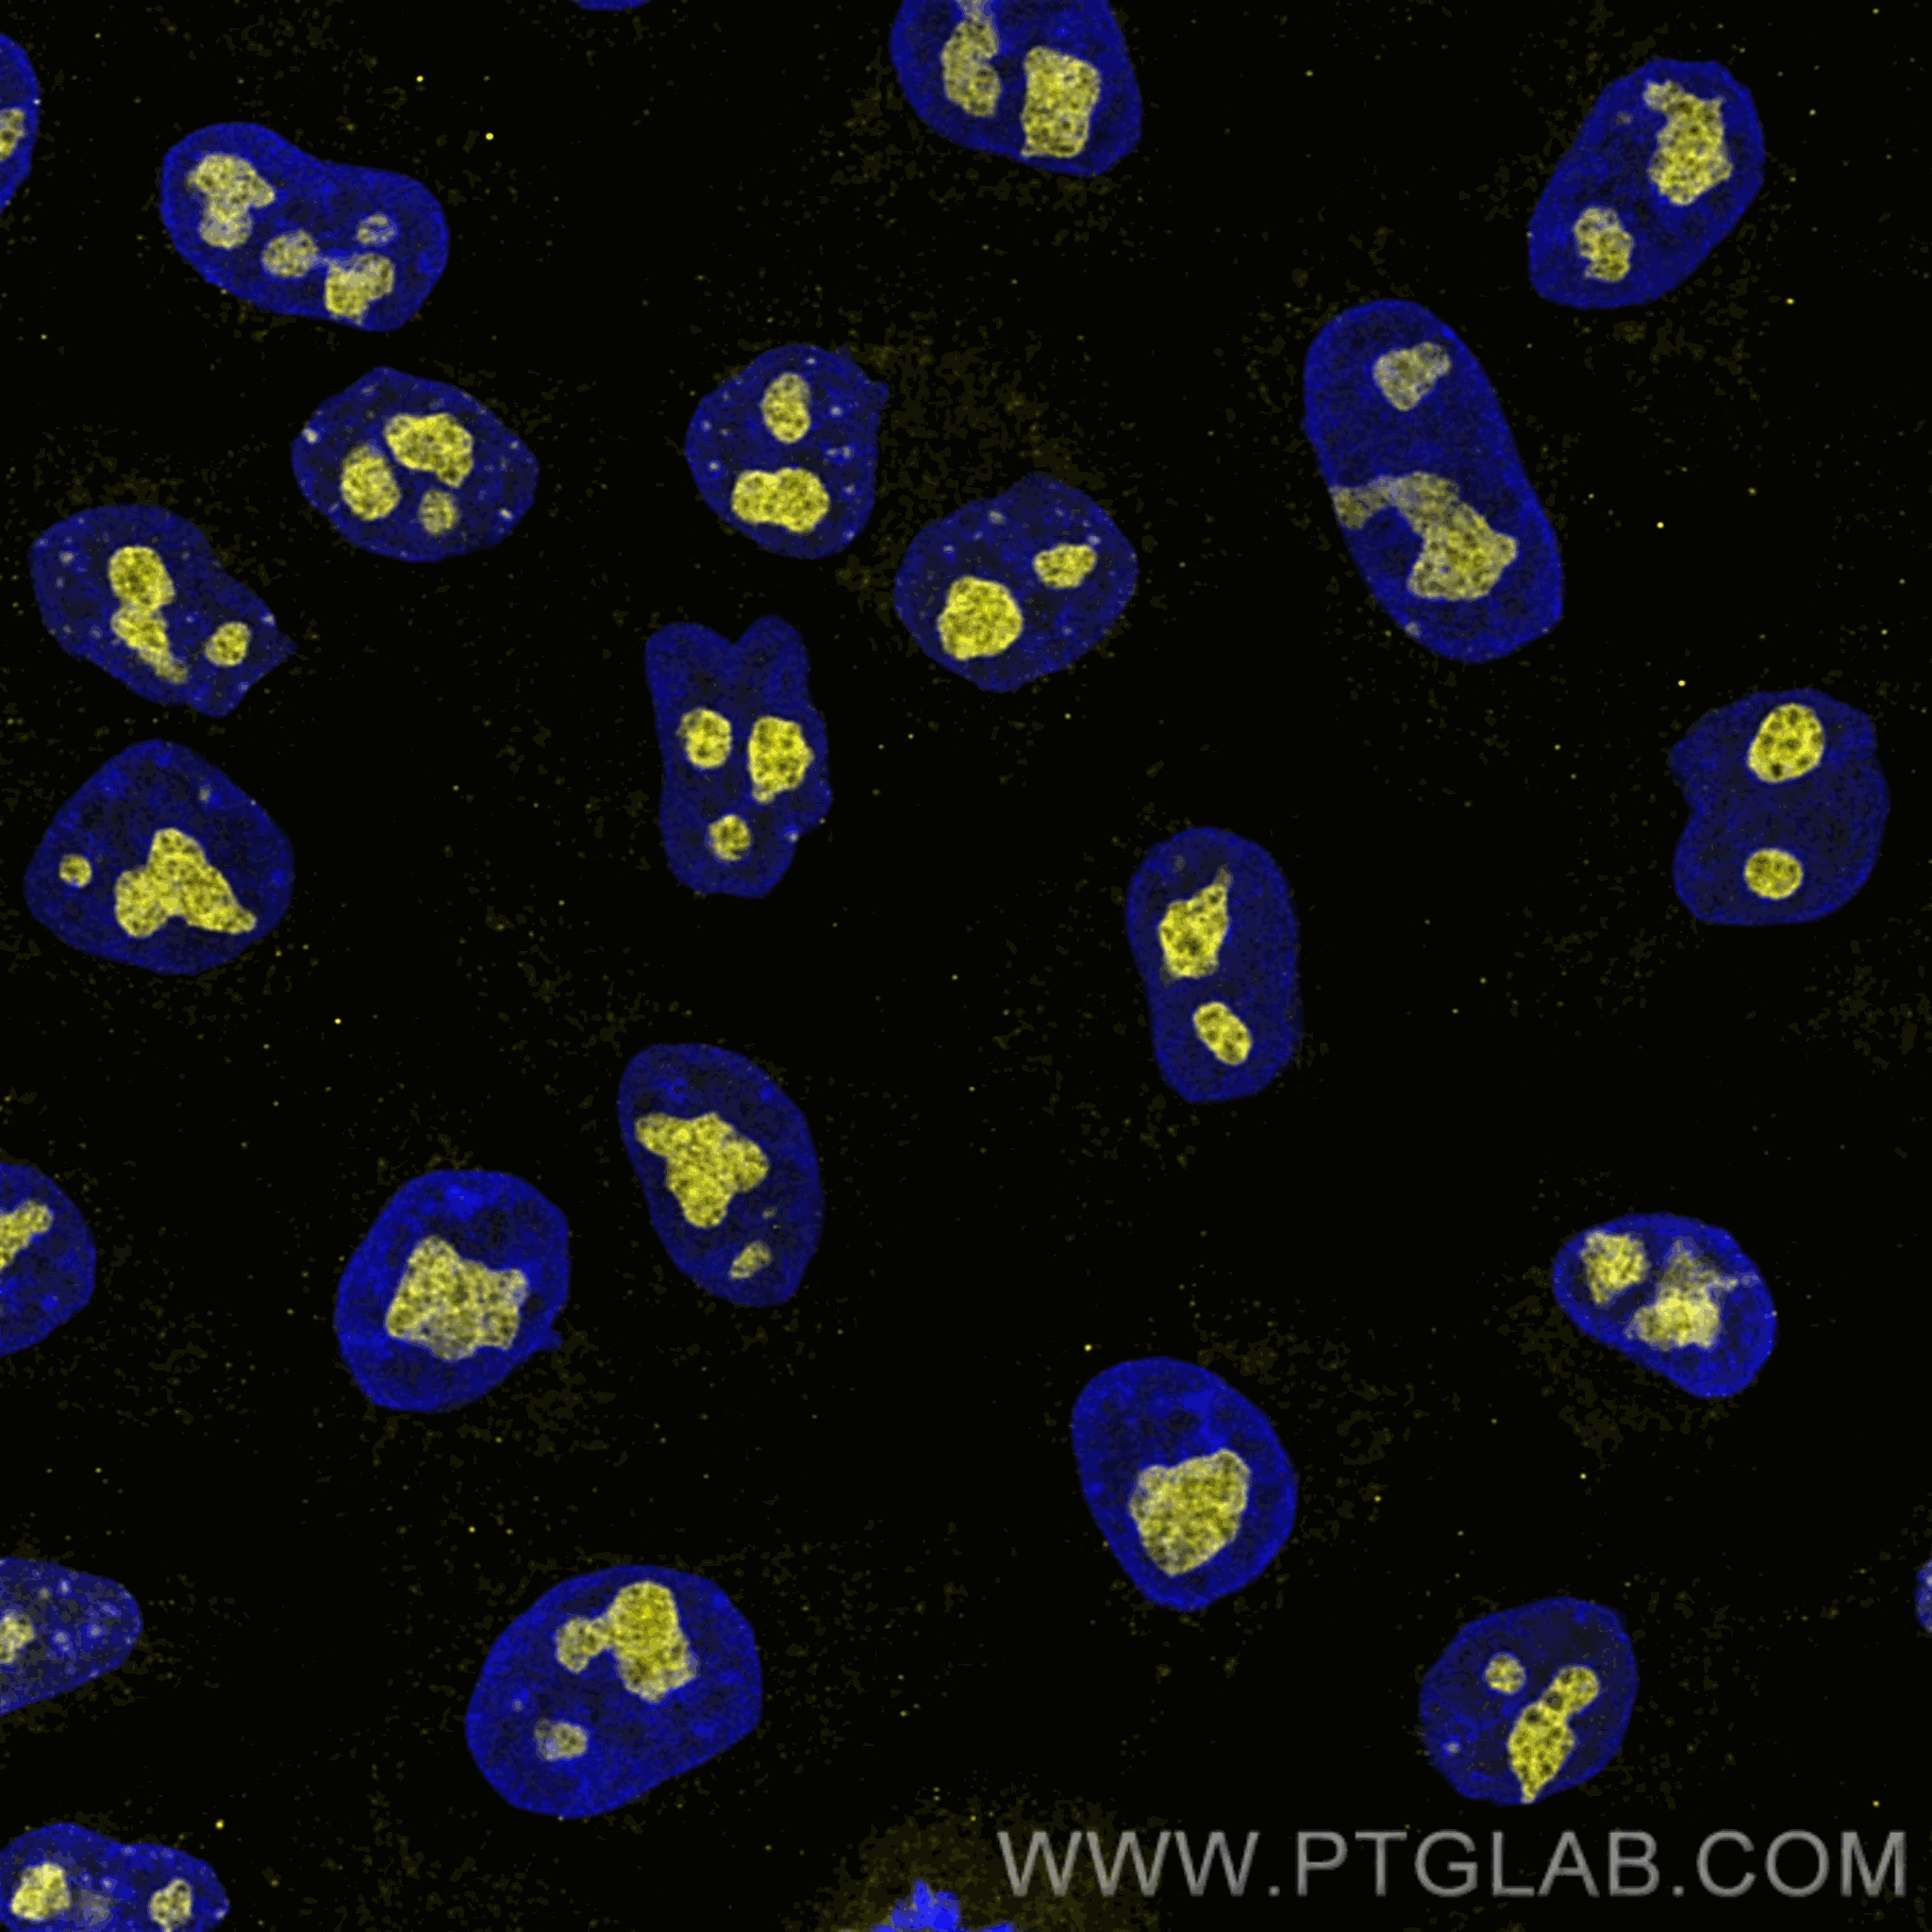 Immunofluorescence of HeLa: PFA-fixed HeLa cells were stained with anti-GNL3 antibody (67169-1-lg) labeled with  FlexAble Biotin Antibody Labeling Kit for Mouse IgG2a (KFA047) and Streptavidin-ATTO594​ (yellow). Nuclei are stained with DAPI (blue). Confocal images were acquired with a 100x oil objective and post-processed. Images were recorded at the Core Facility Bioimaging at the Biomedical Center, LMU Munich.